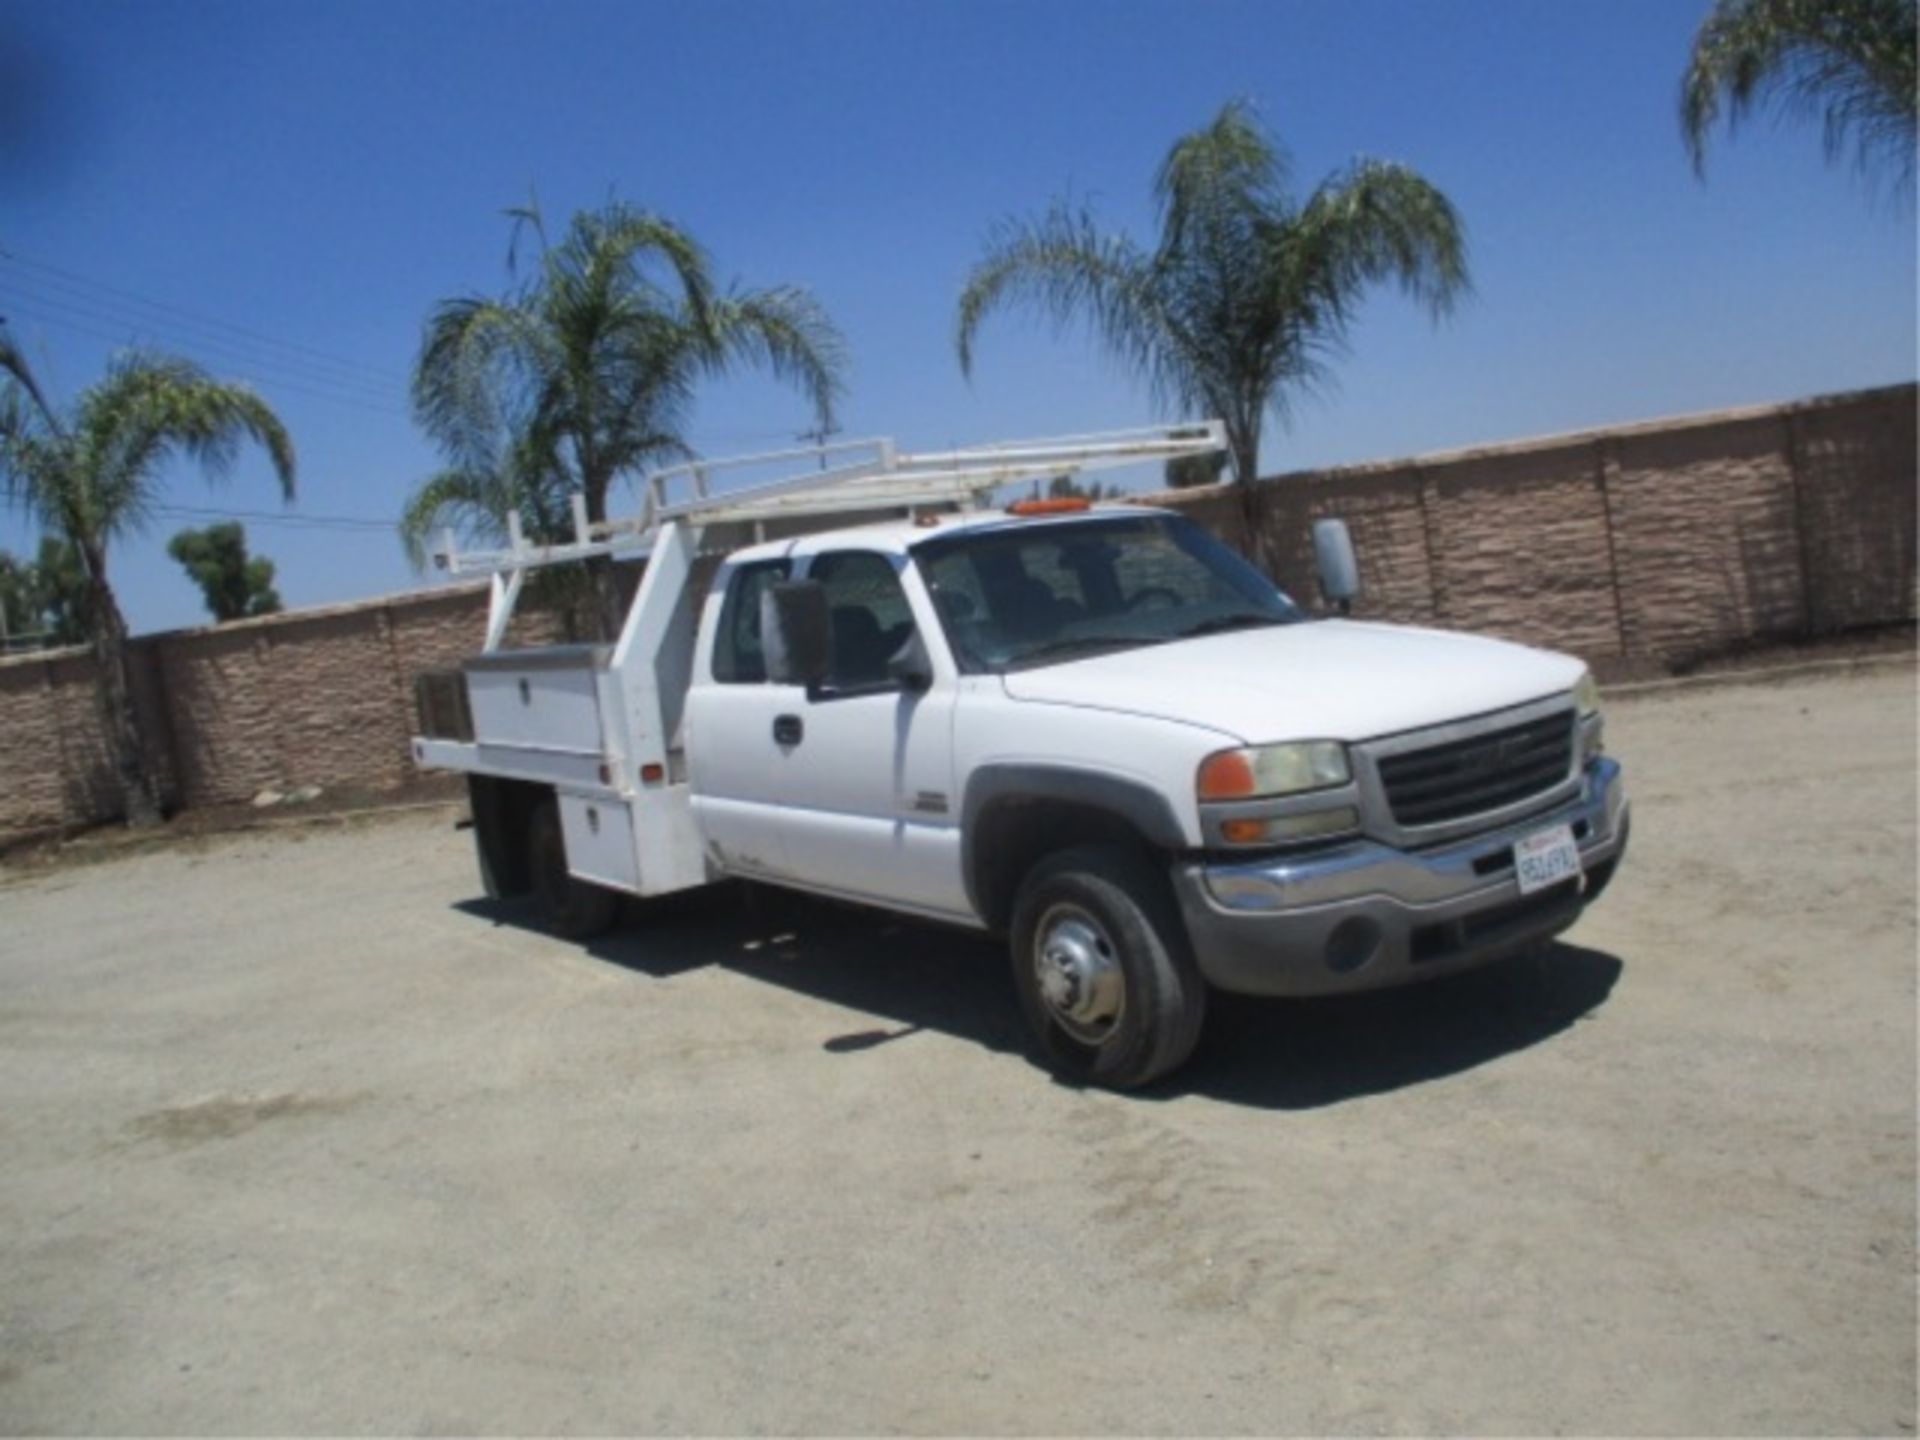 2006 Chevrolet 3500 Extended-Cab Utility Truck, 6.6L Turbo Diesel, Automatic, Tool Boxes, Lumber - Image 8 of 71